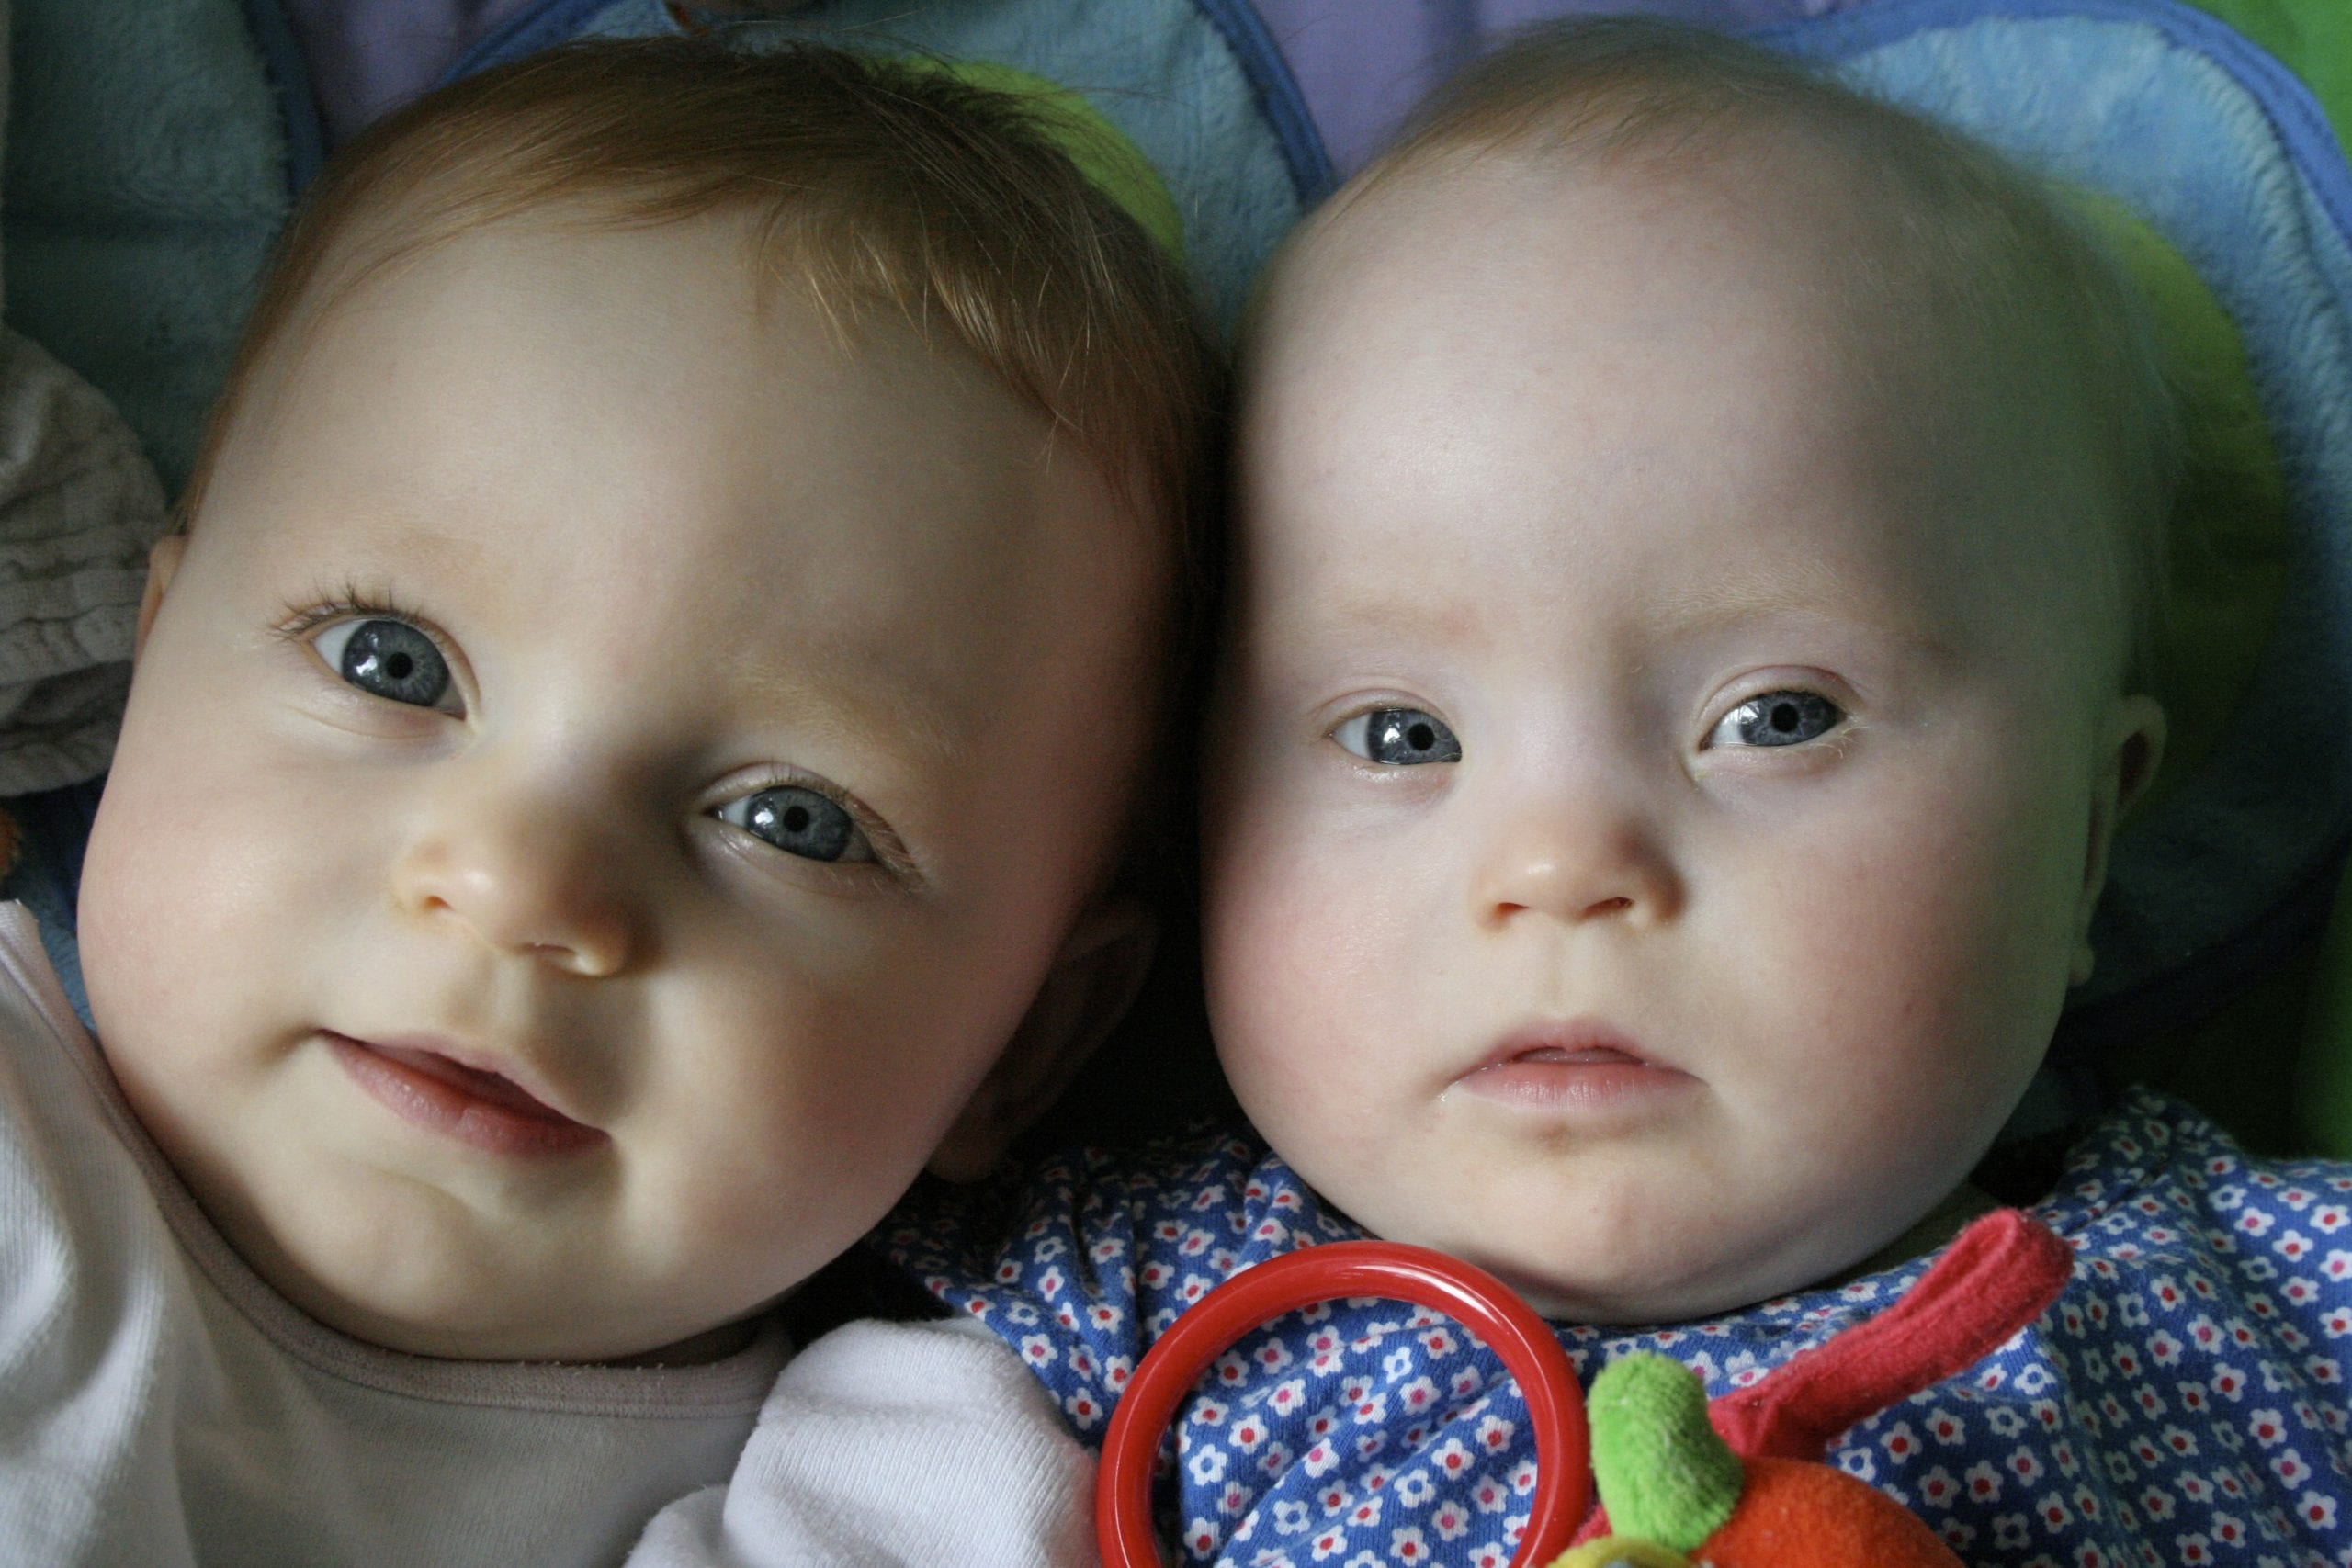 Two babies lie looking at the camera. Their heads are close together. One of the babies has Down's syndrome.